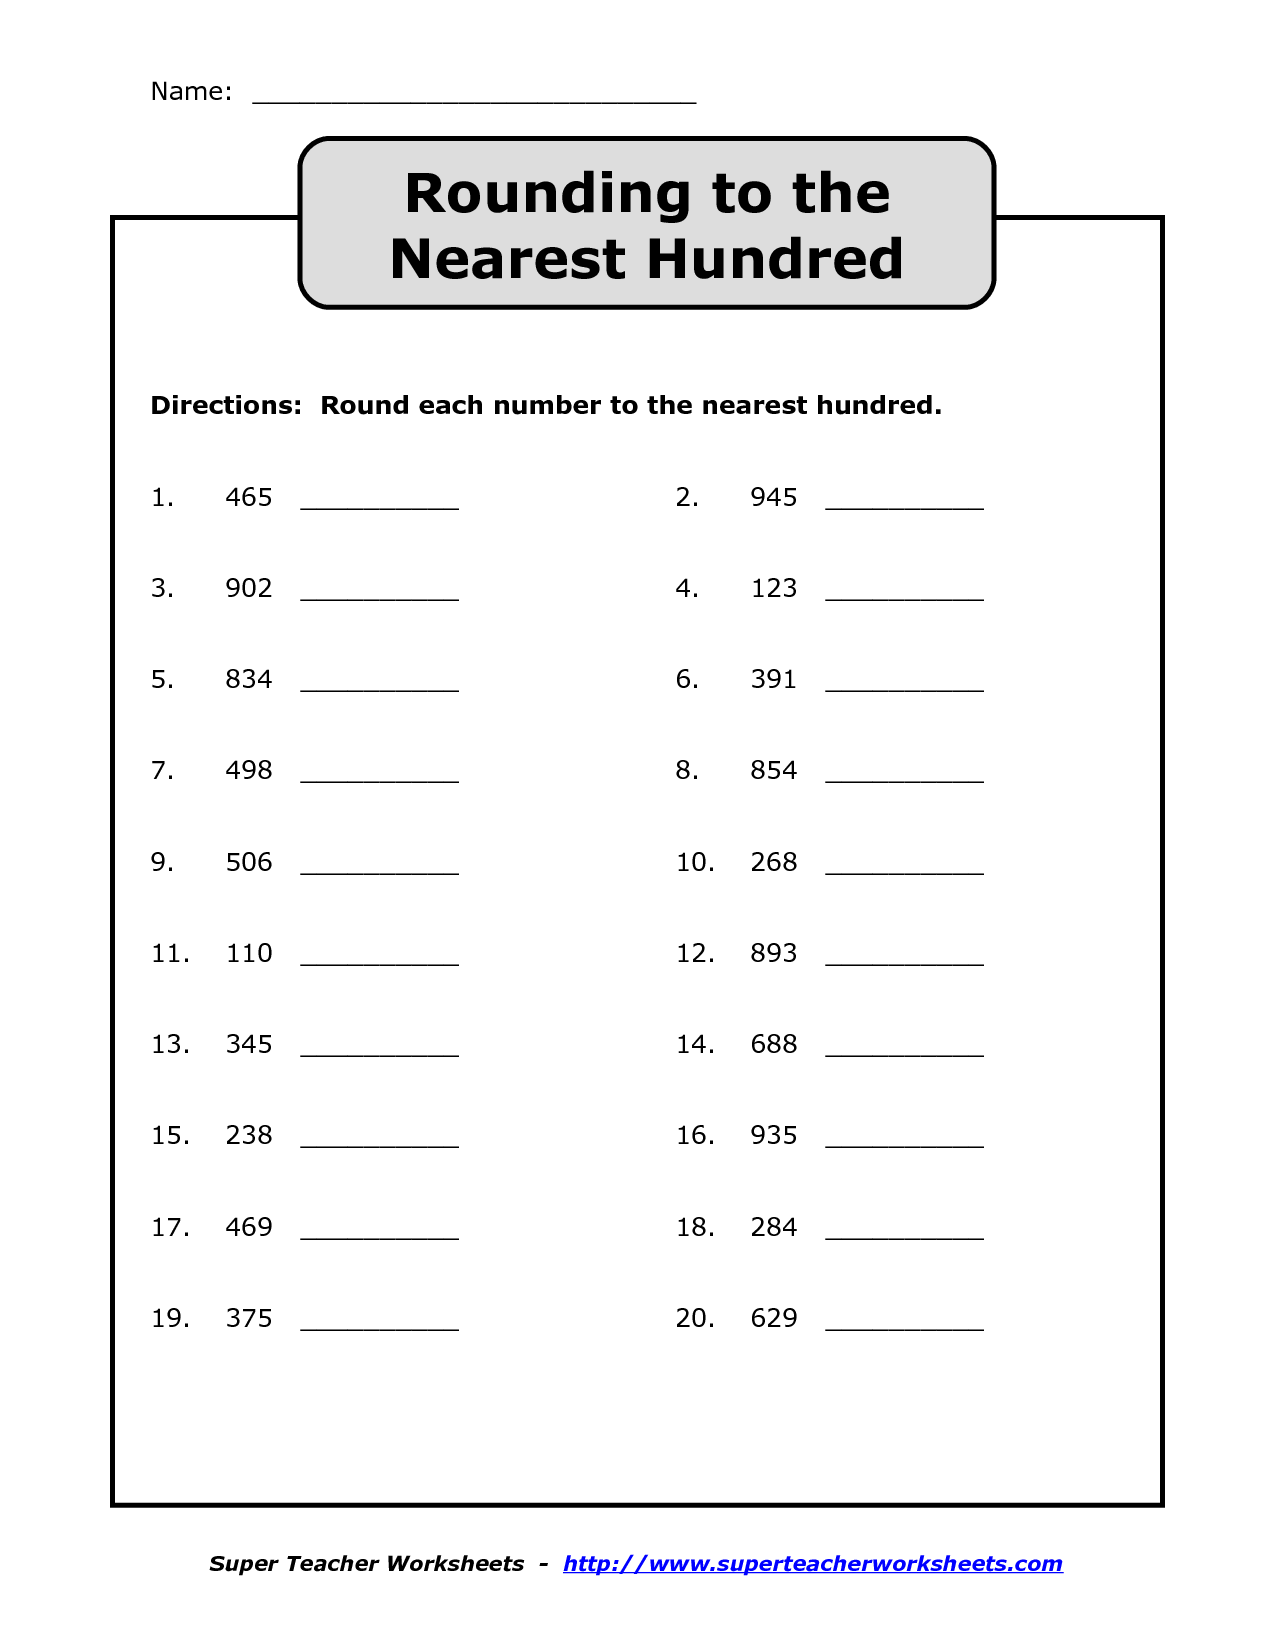 rounding-worksheet-to-the-nearest-1000